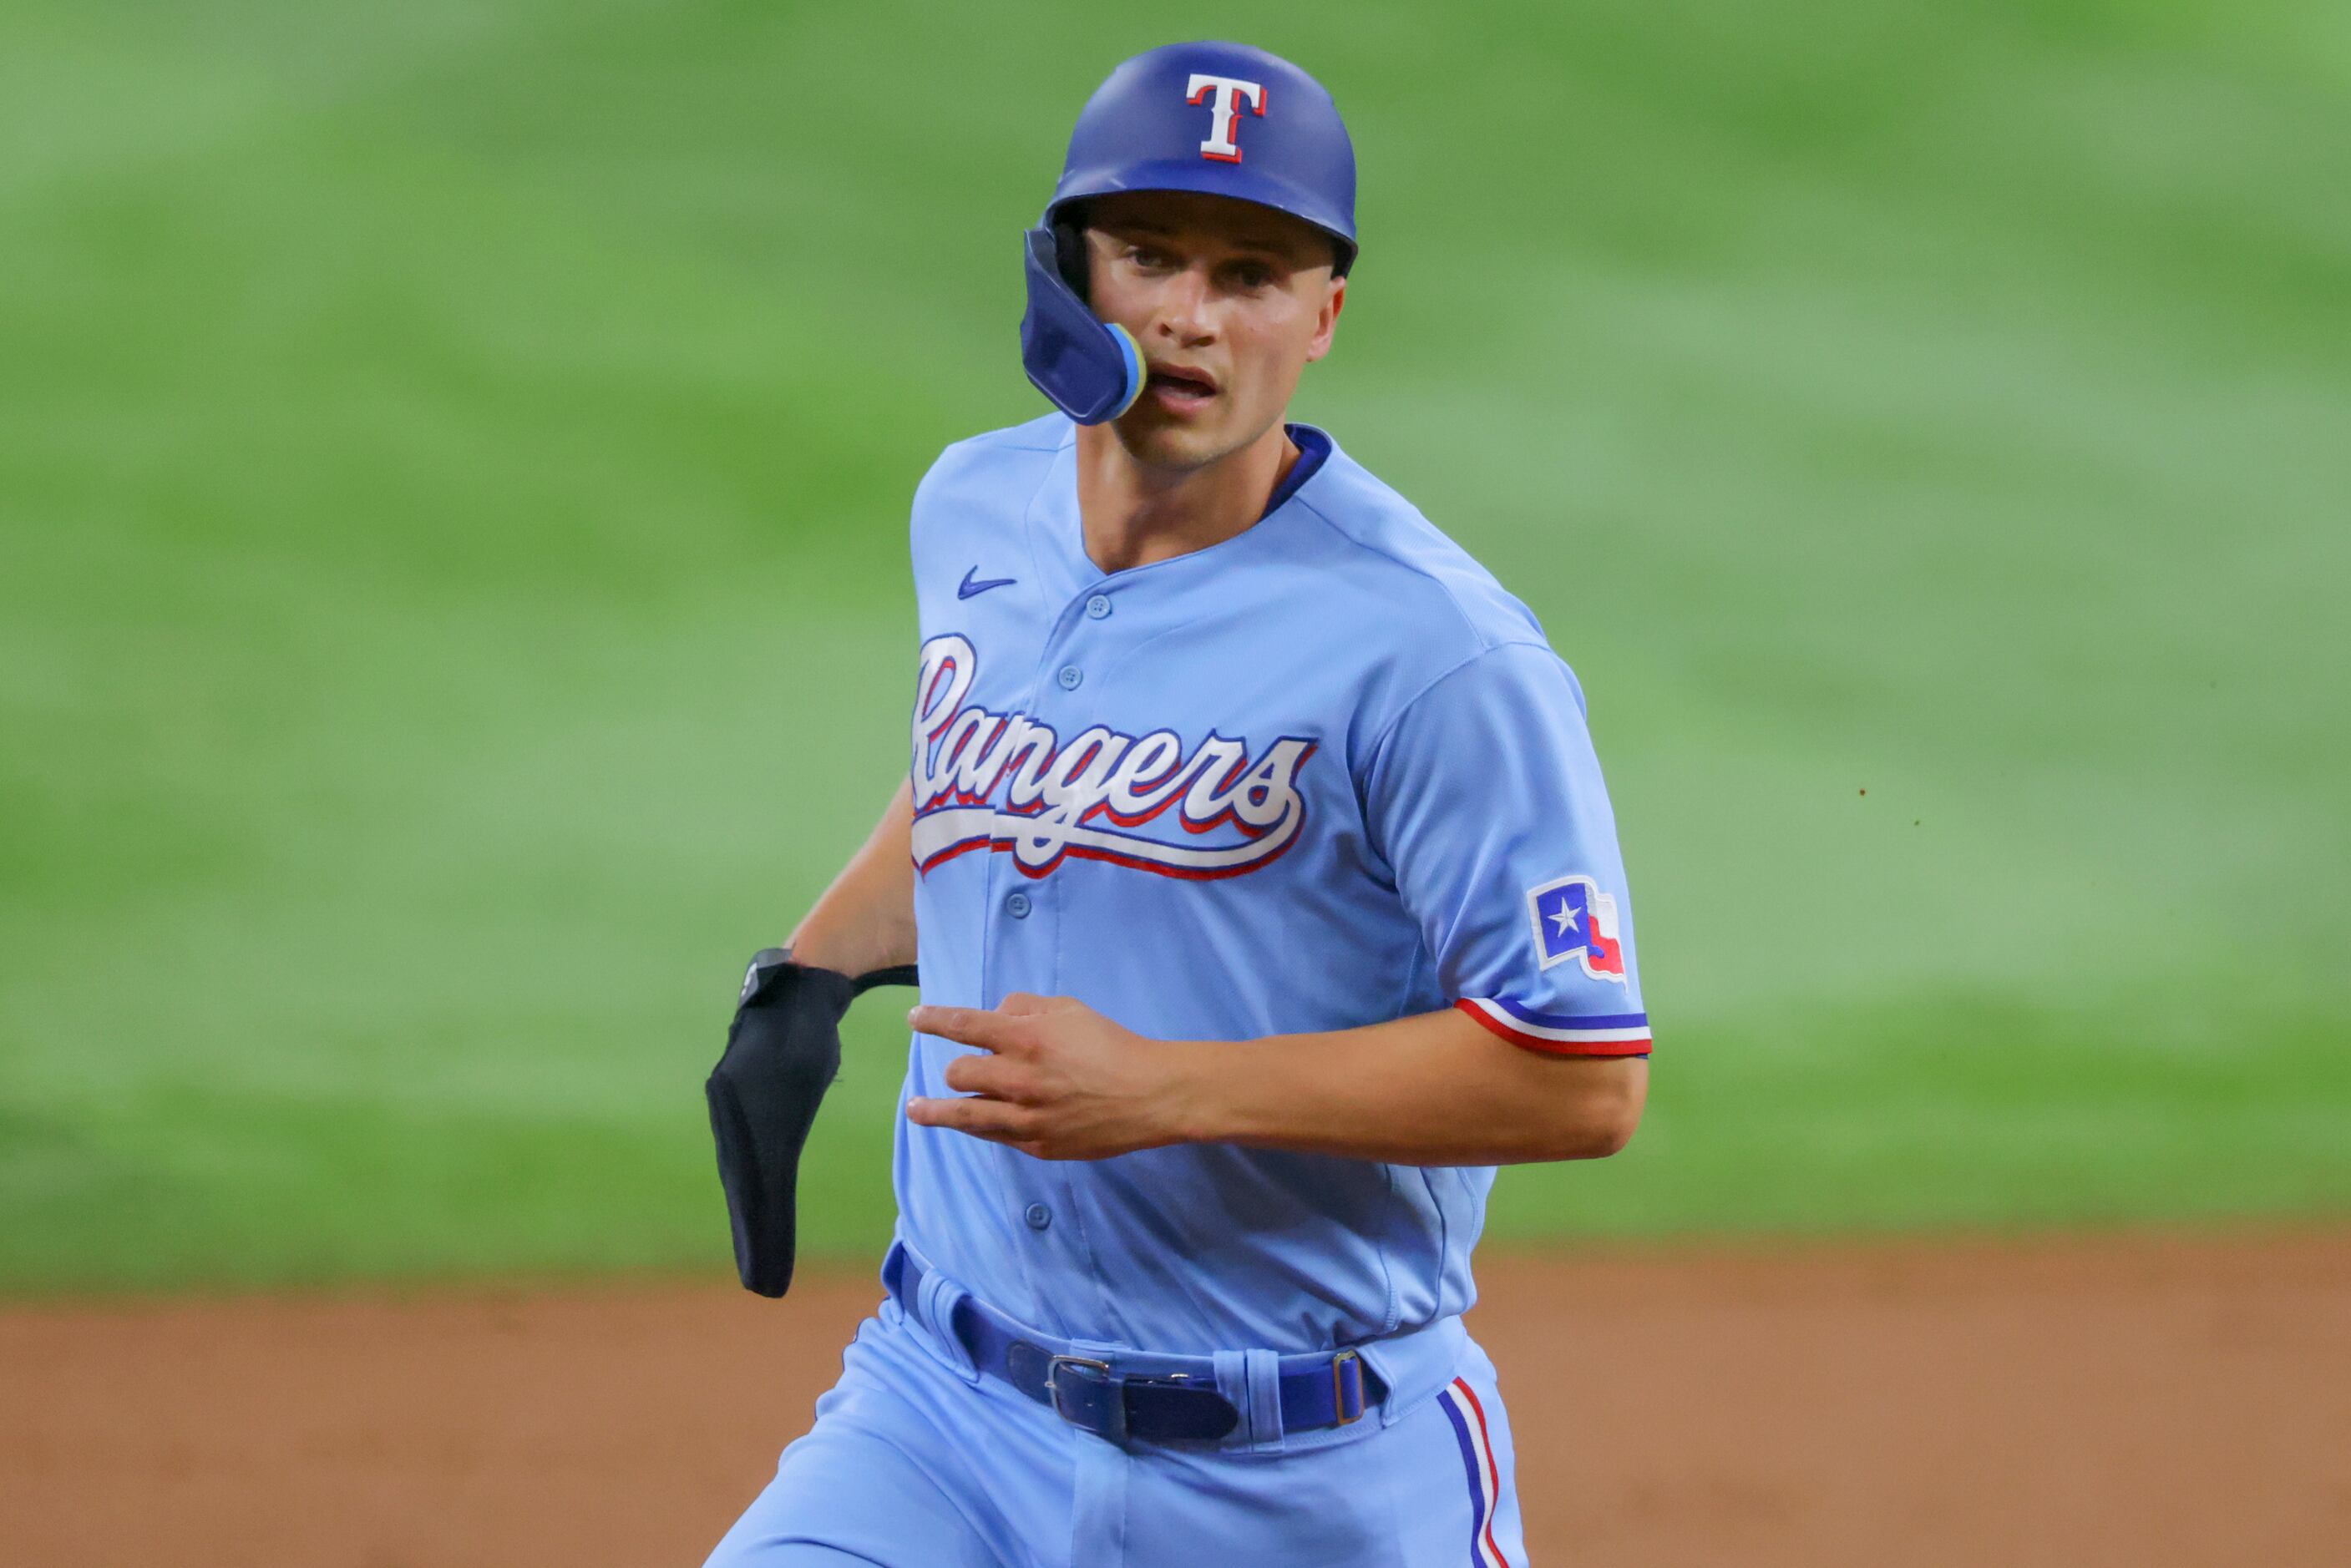 10 things to know about Rangers' Corey Seager, like his adorable dog and  big contract